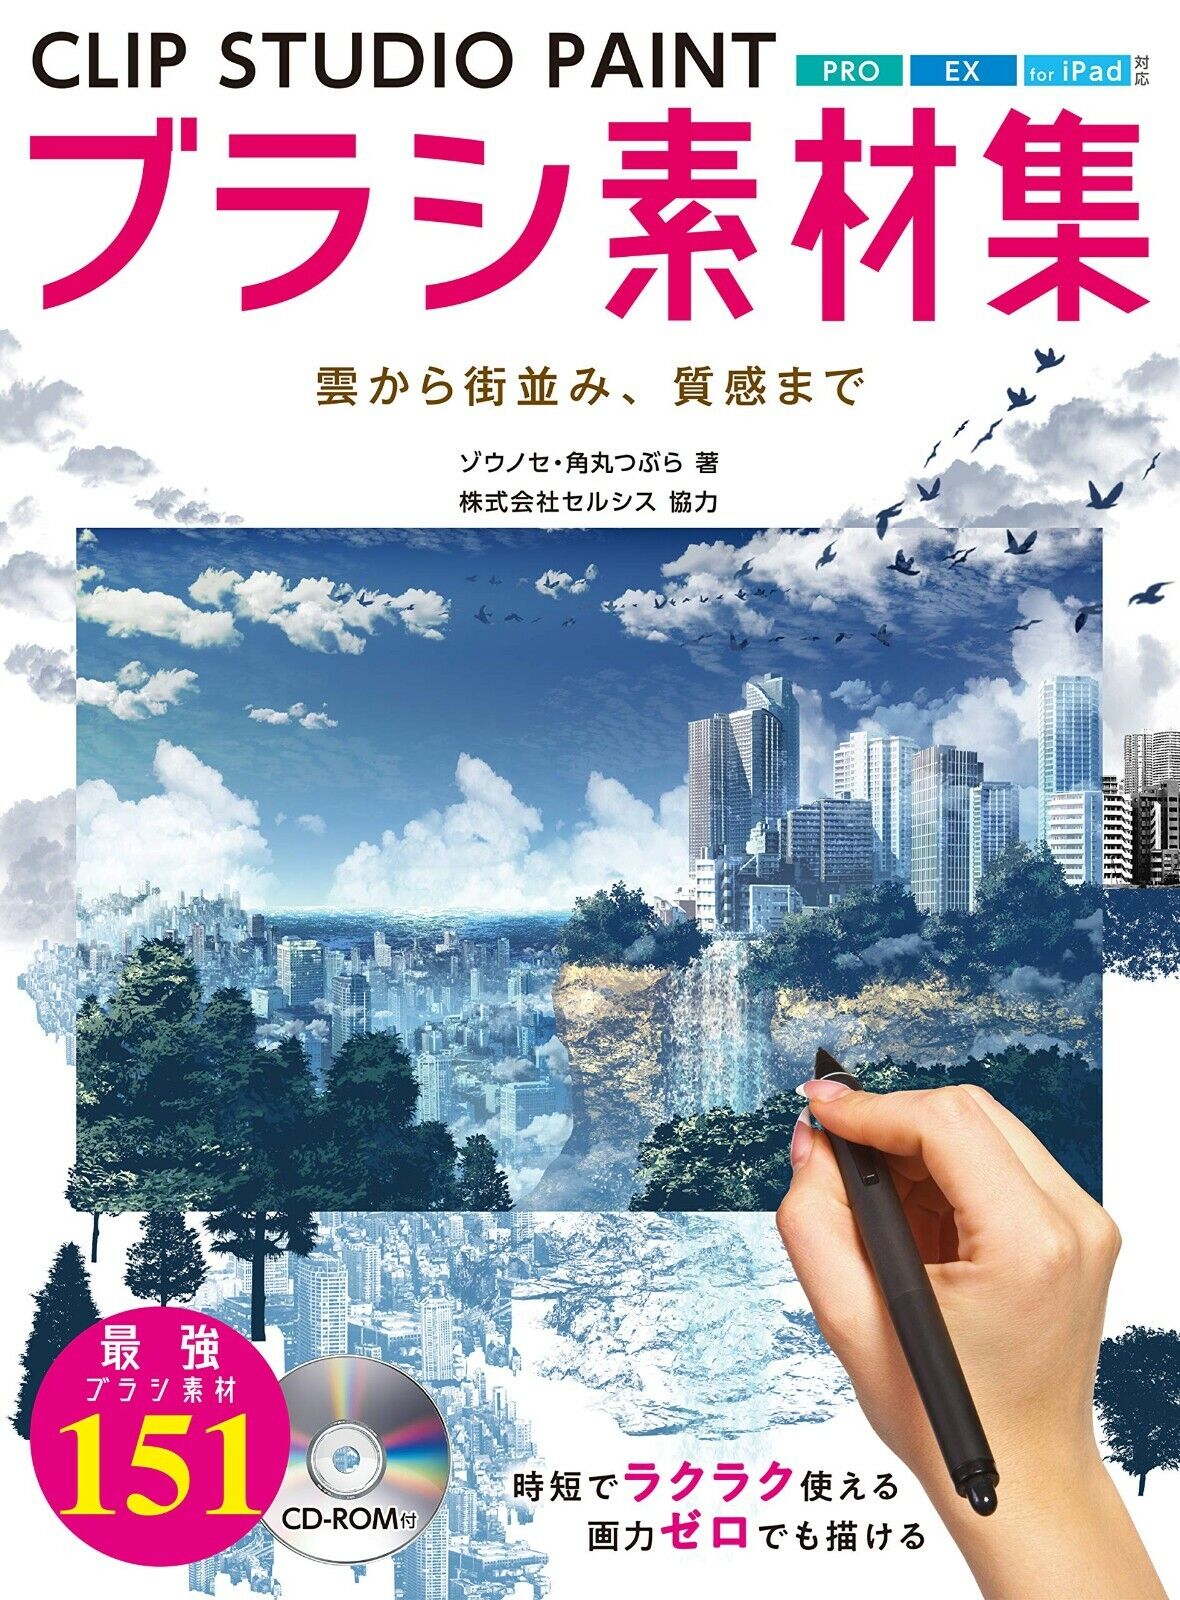 How To Draw Manga CLIP STUDIO PAINT Brushes Collection Book | Japan Art